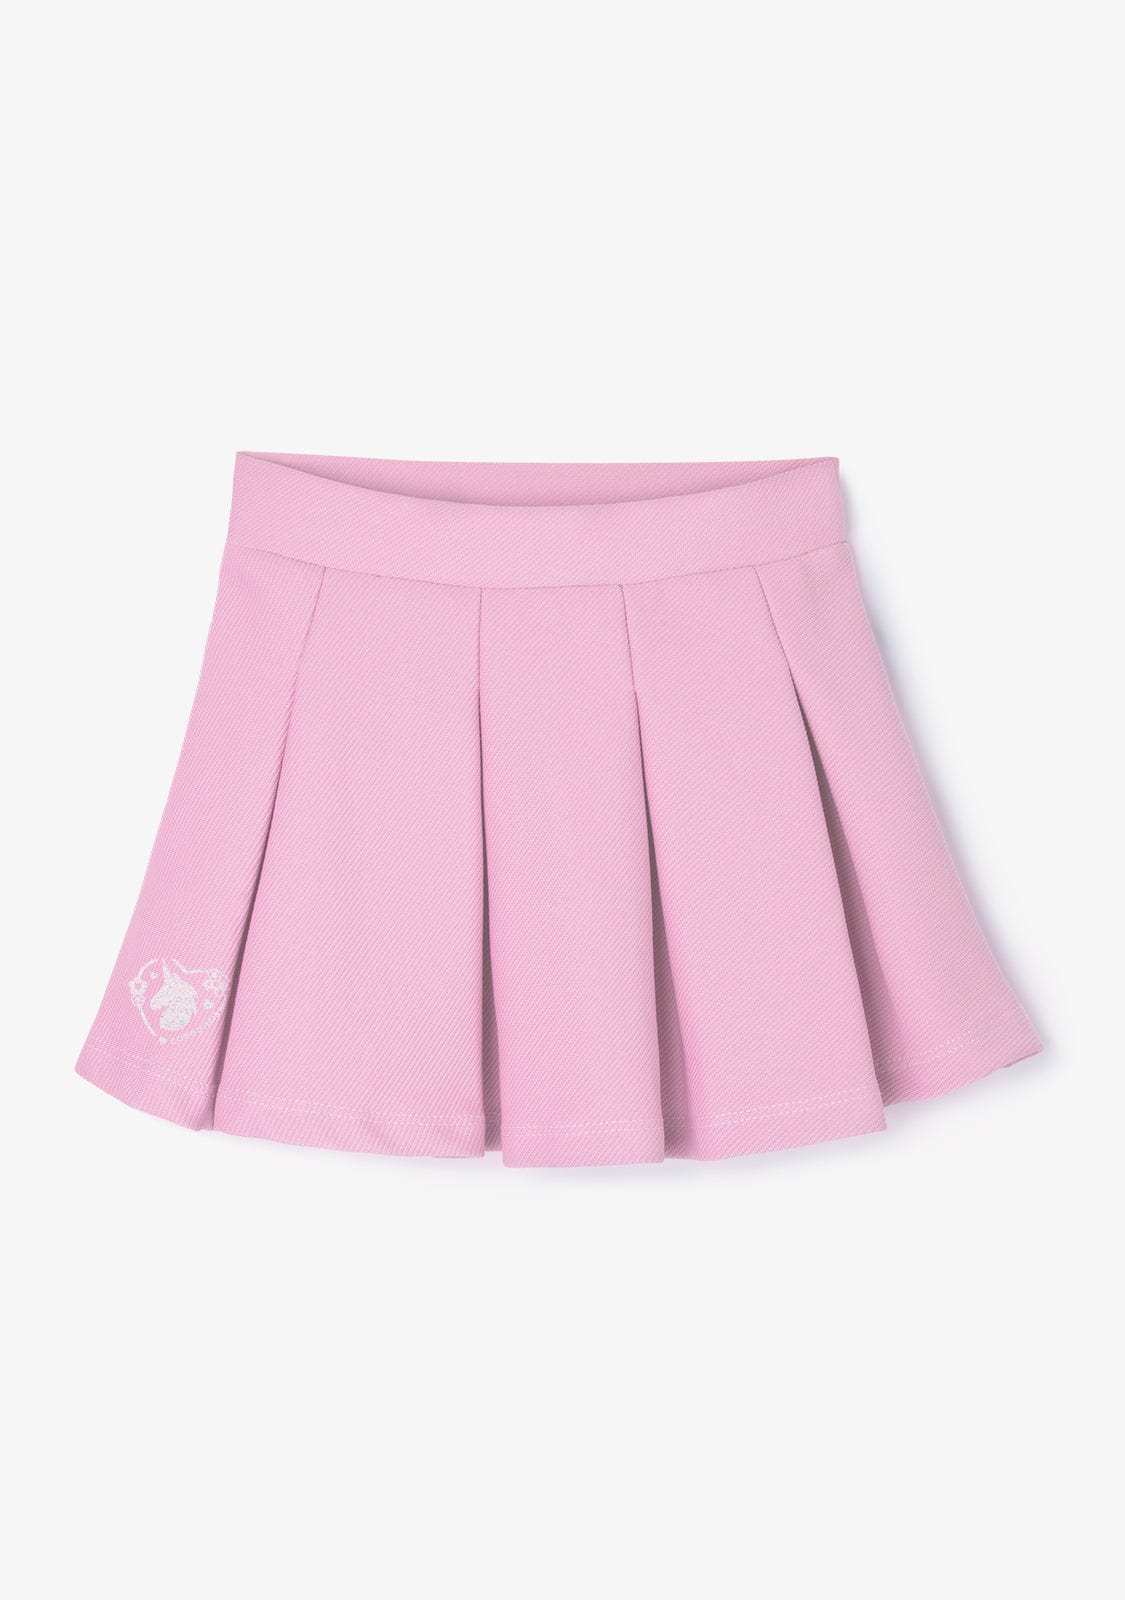 CONGUITOS TEXTIL Clothing Girl´s Pink Box Pleat Skirt